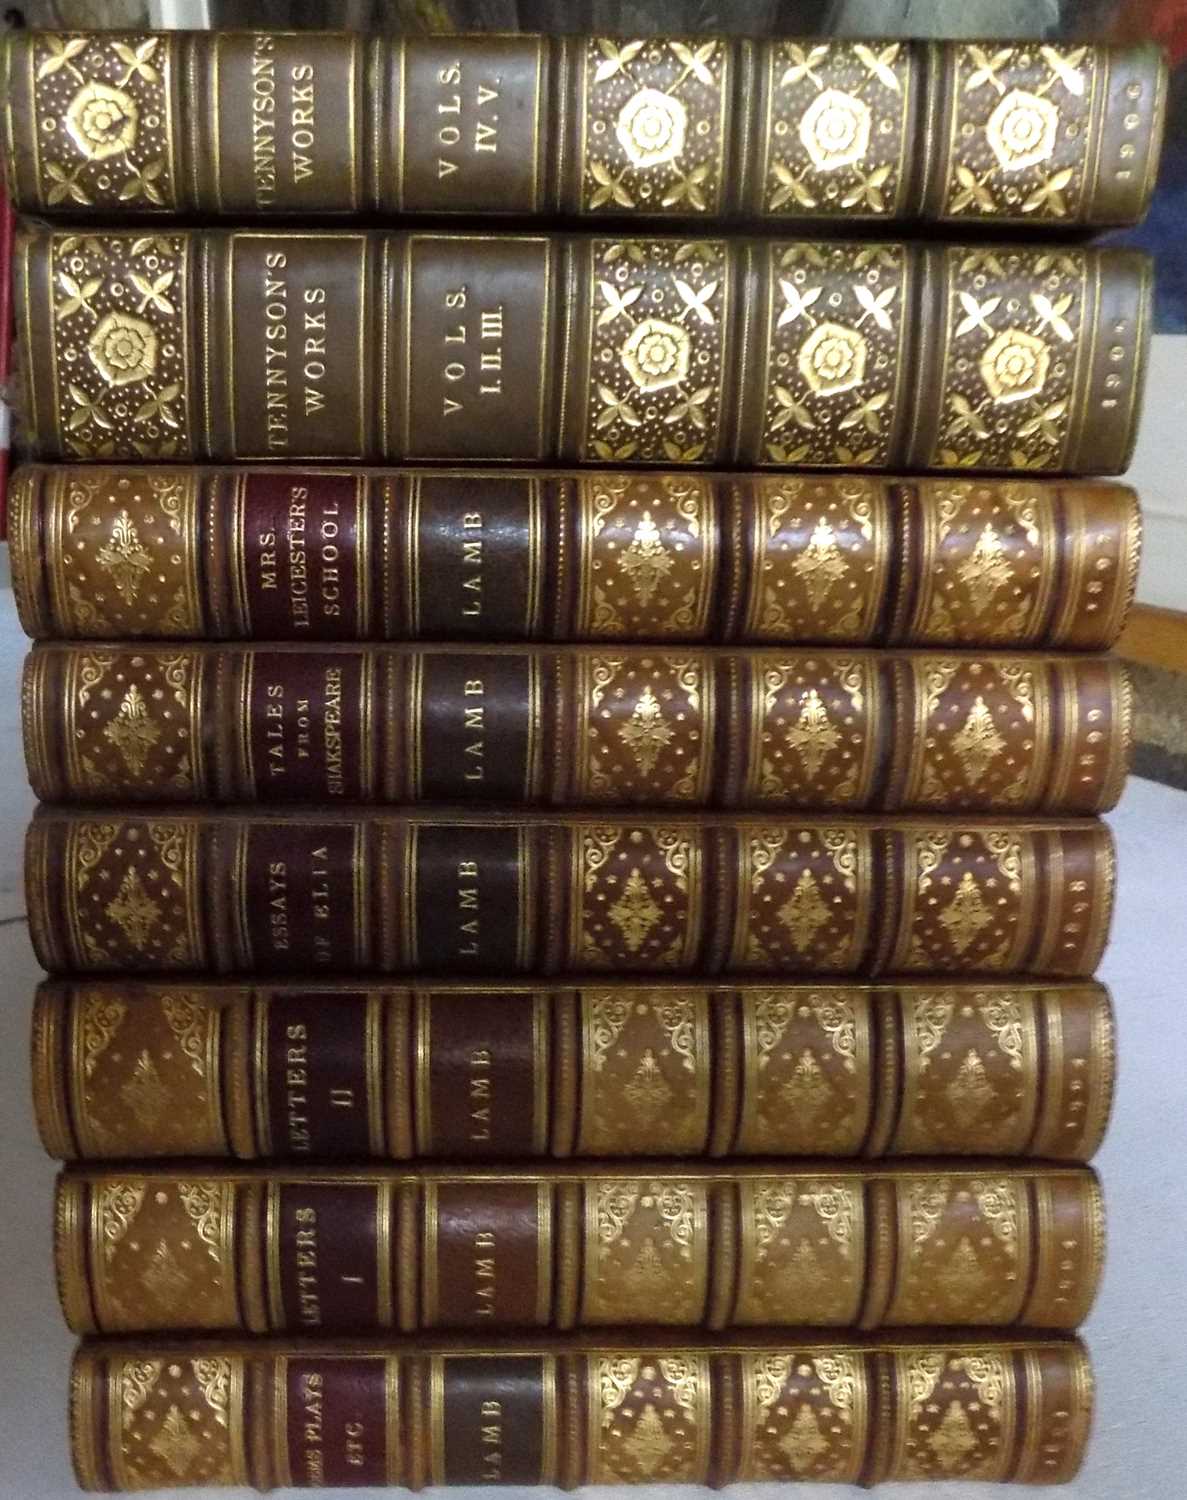 ALFRED LORD TENNYSON. "Works." 5 Vols bound in 2, green calf gilt by Bumpus, aeg, 1906 vg. CHARLES - Image 4 of 6